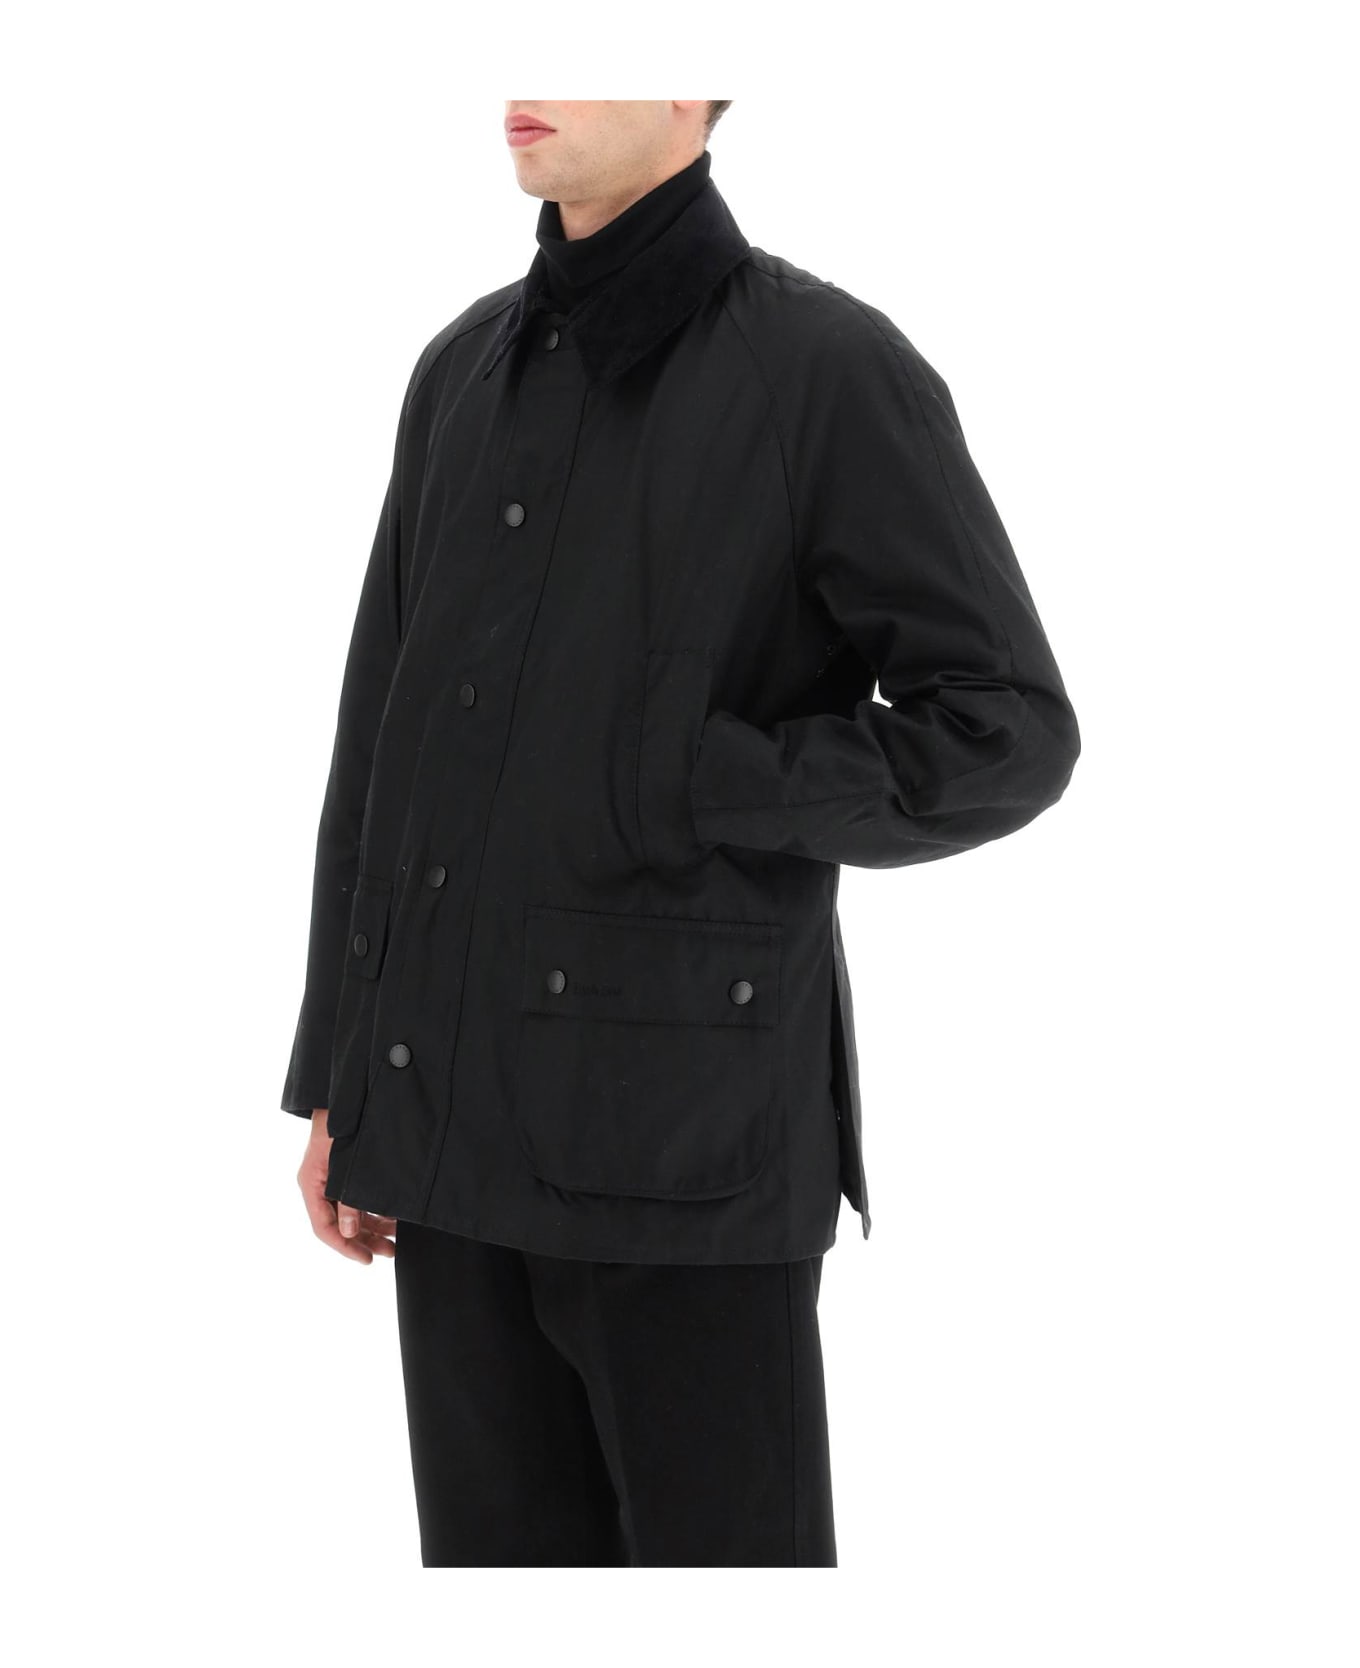 Barbour Ashby Waxed Jacket - BLACK CLASSIC (Black)